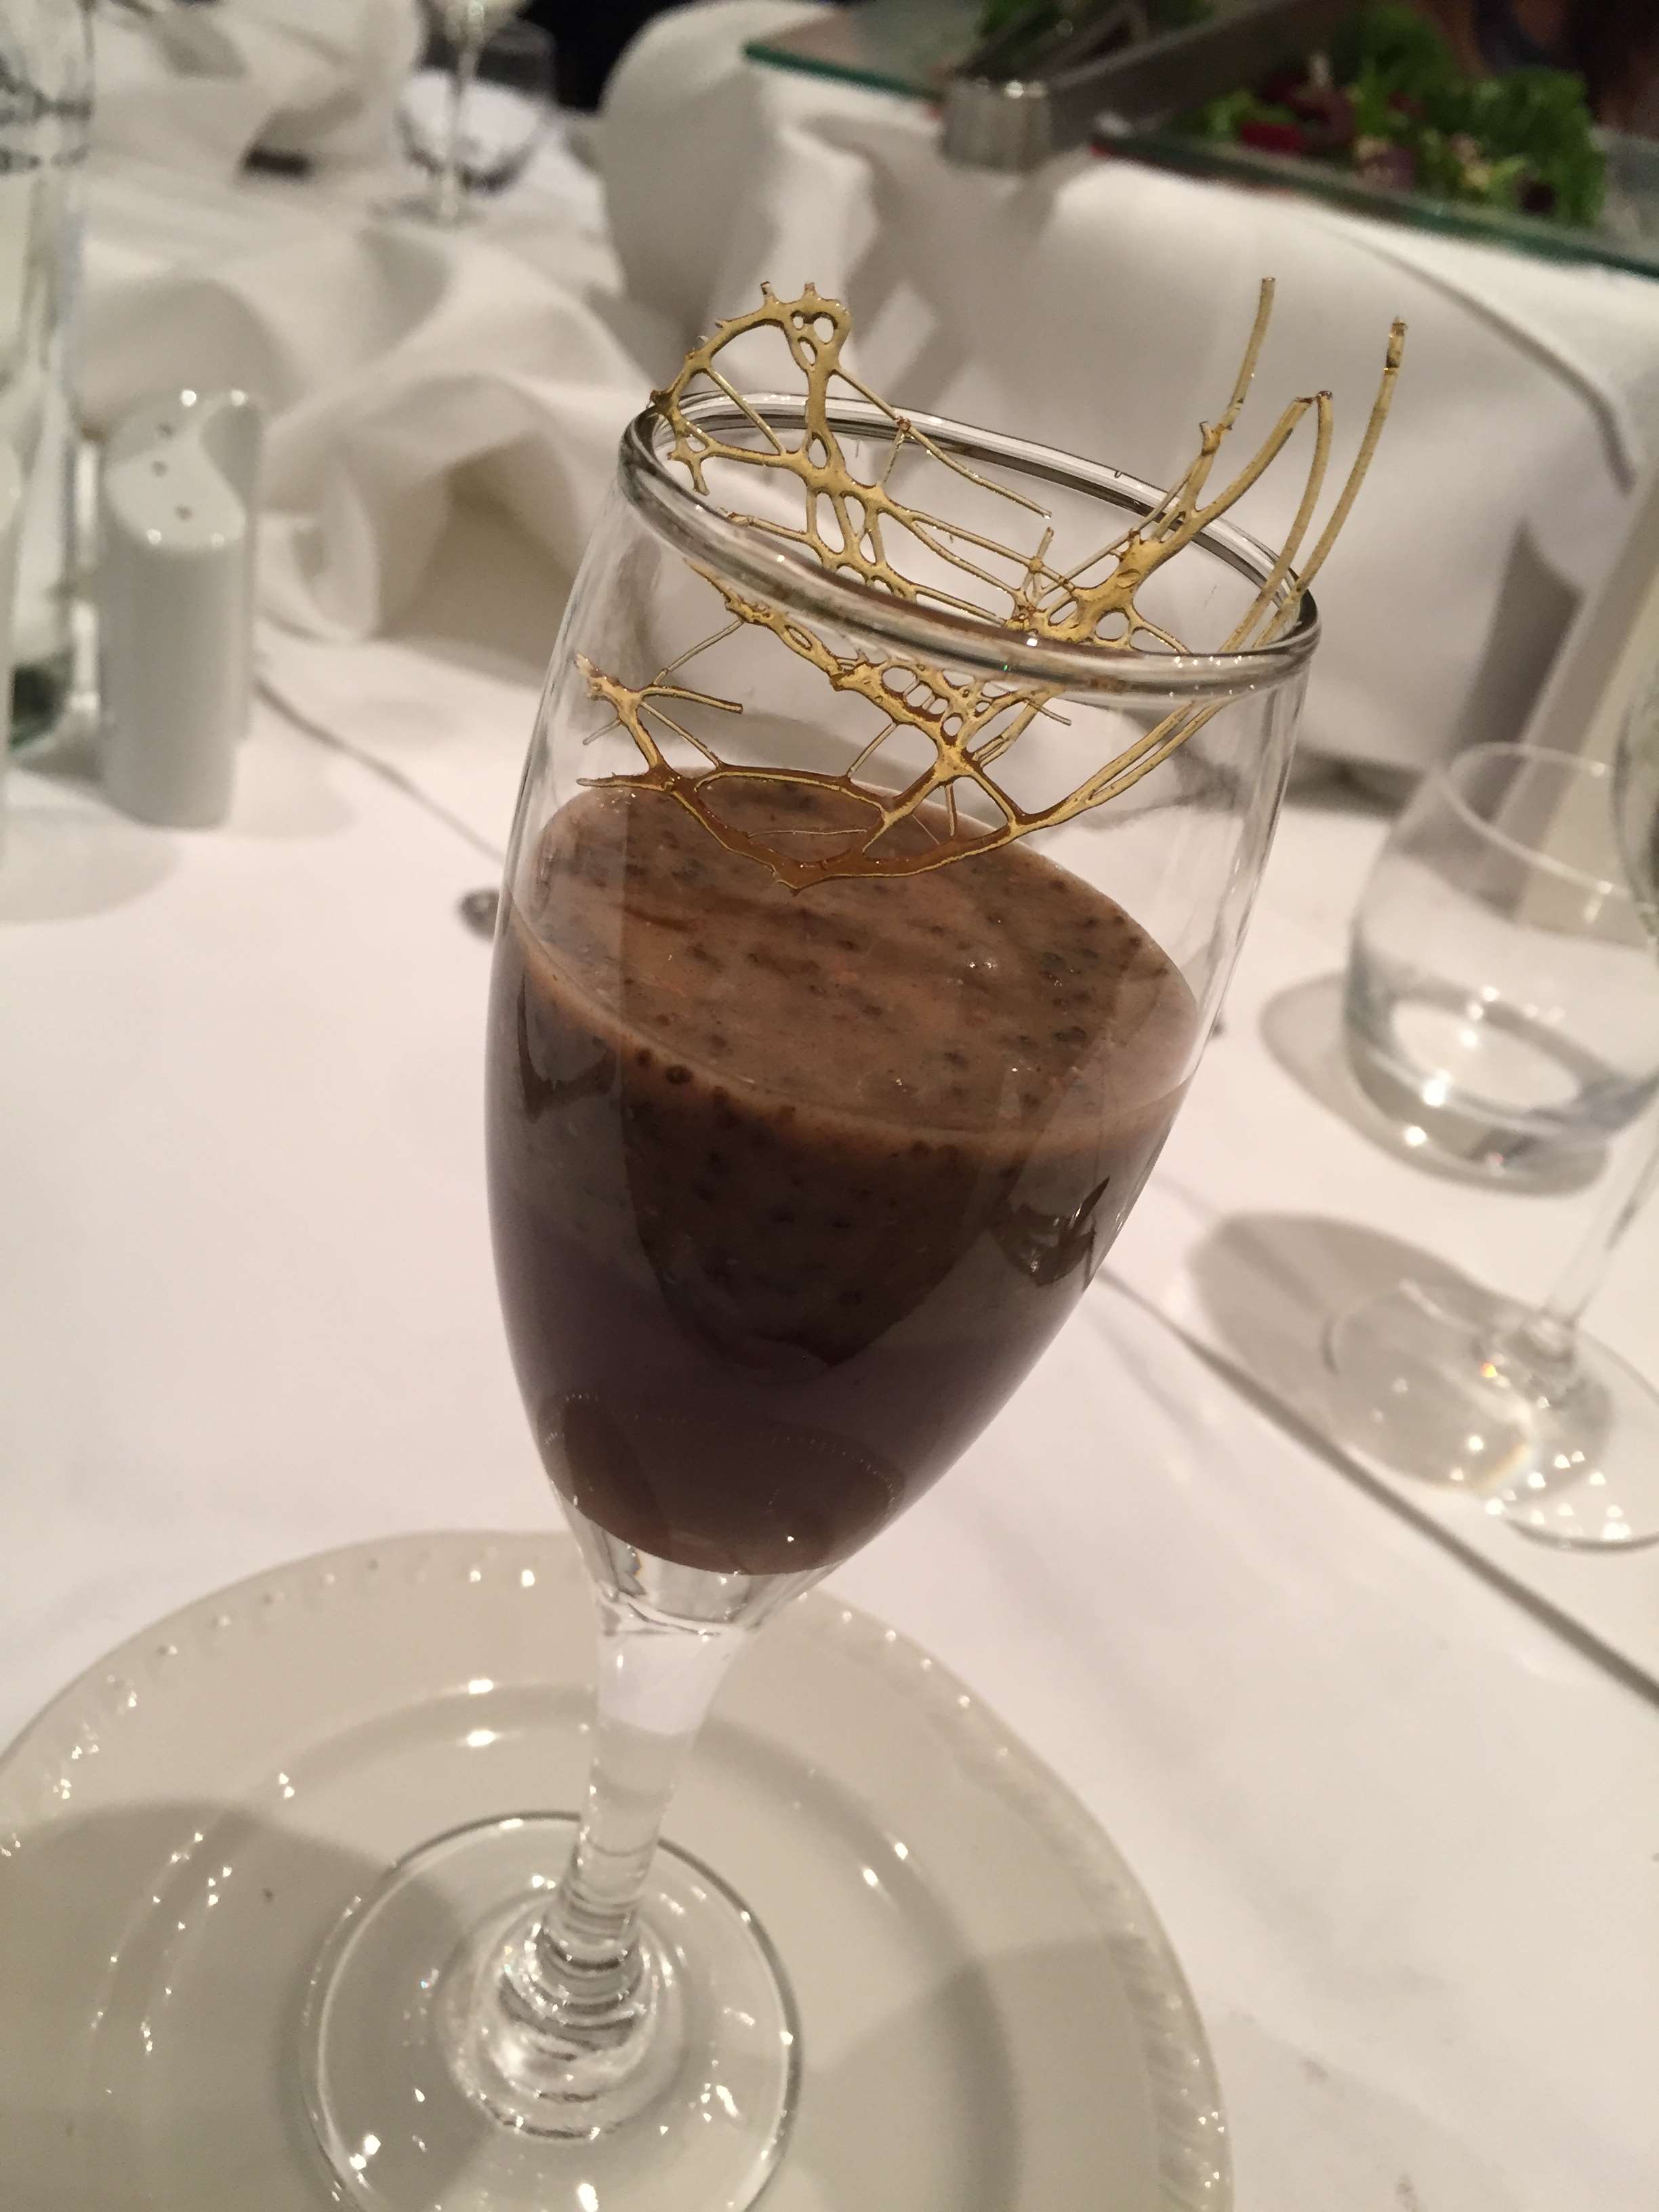 One of the chocolate desserts. Credit: Molly Mileham-Chappell